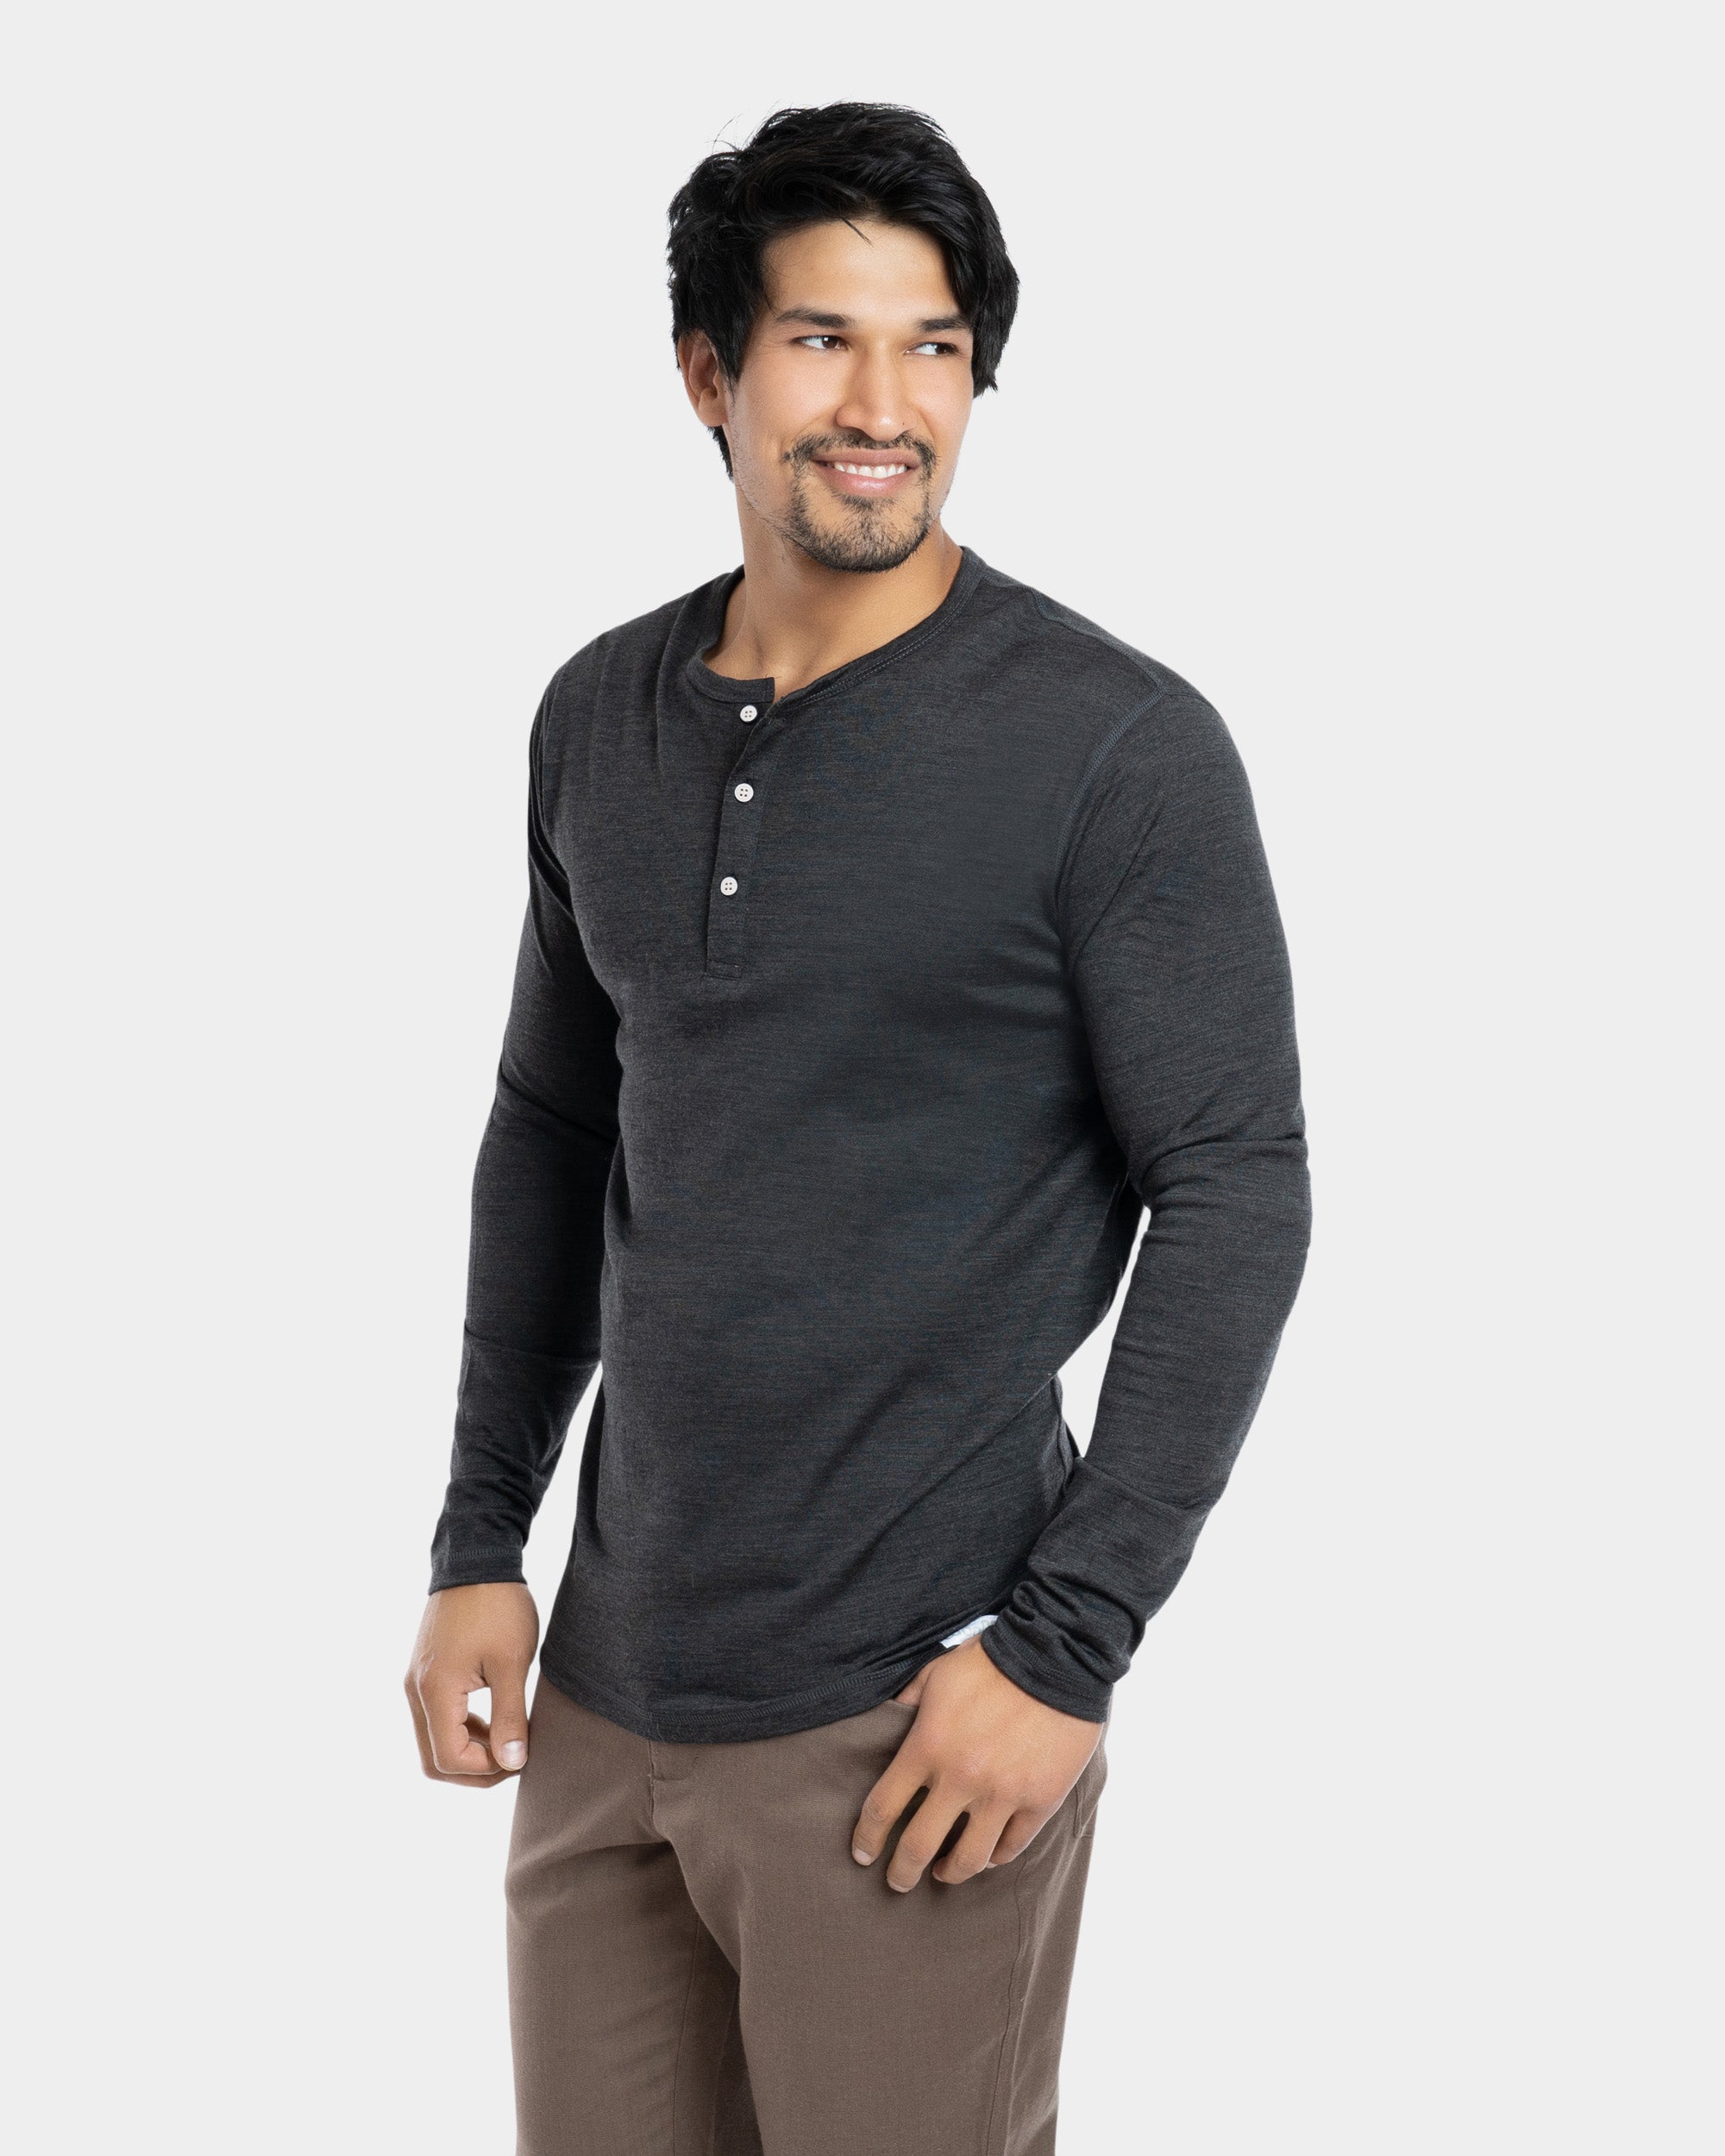 Men's Merino Wool Long Sleeve Button Up Weight | Medium | Charcoal | by Woolly Clothing Co